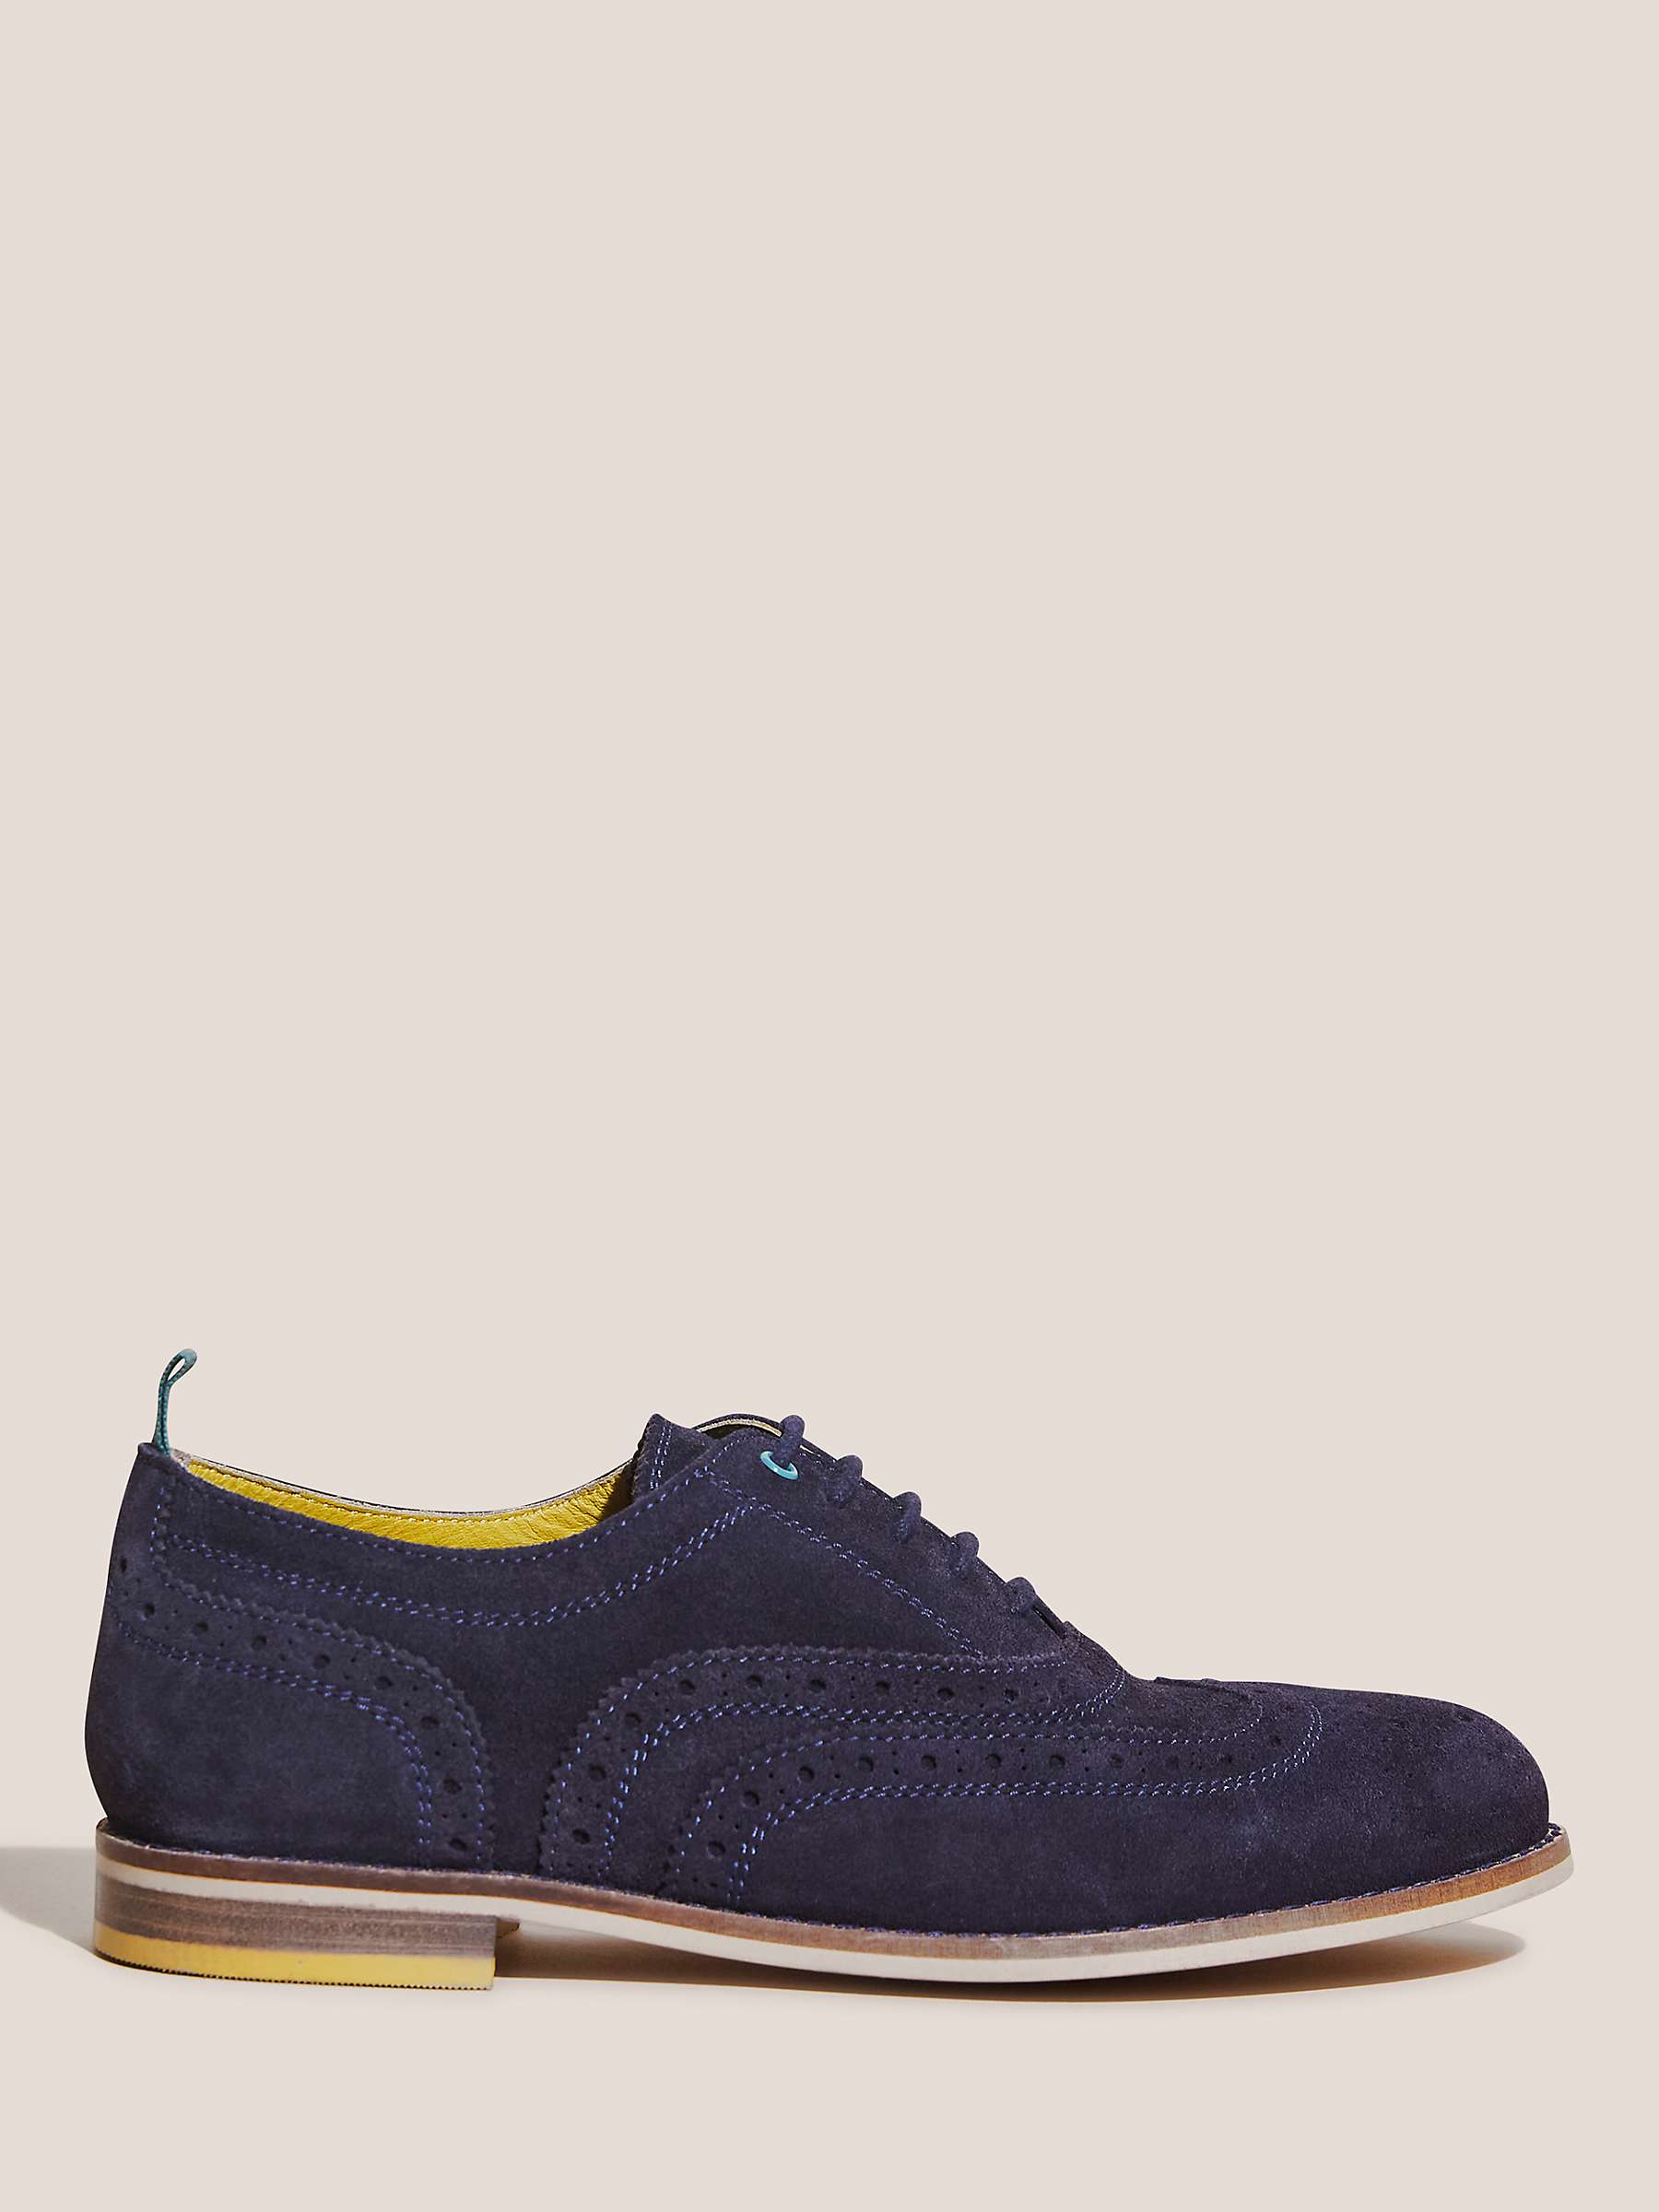 White Stuff Thistle Suede Leather Lace Up Brogues, Navy/Multi at John ...